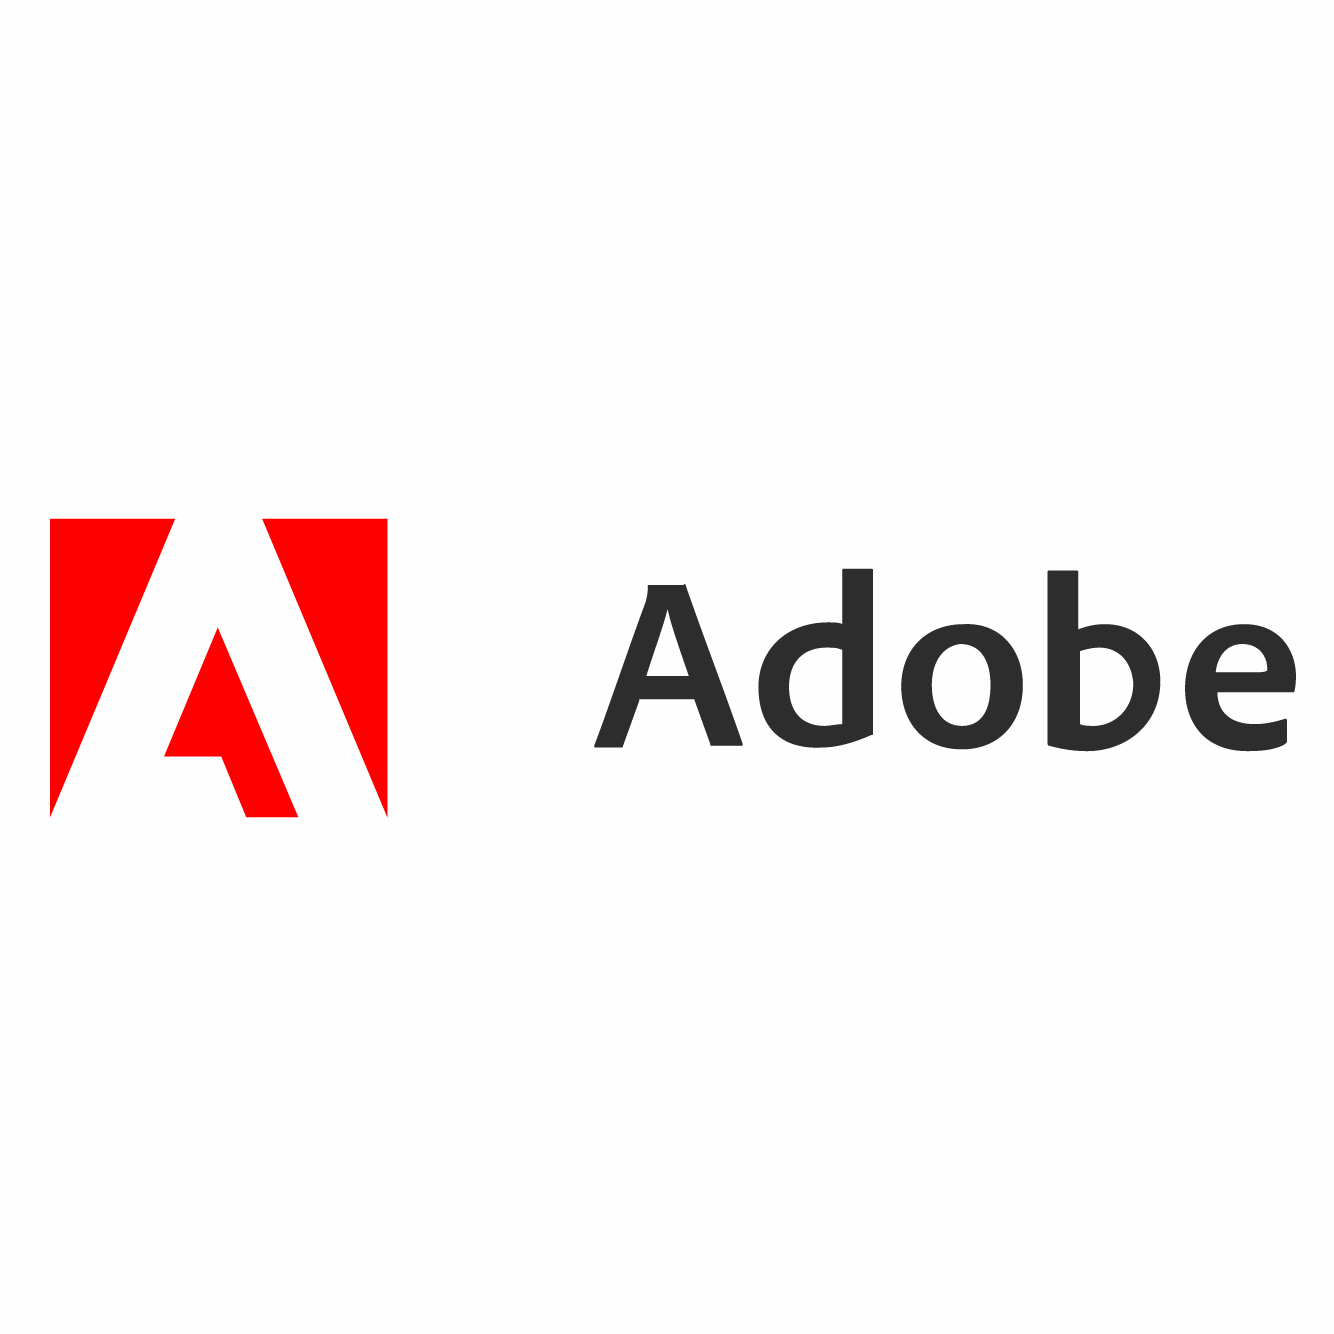 https://securetech.local/wp-content/uploads/2019/02/17.ADOBE_.png